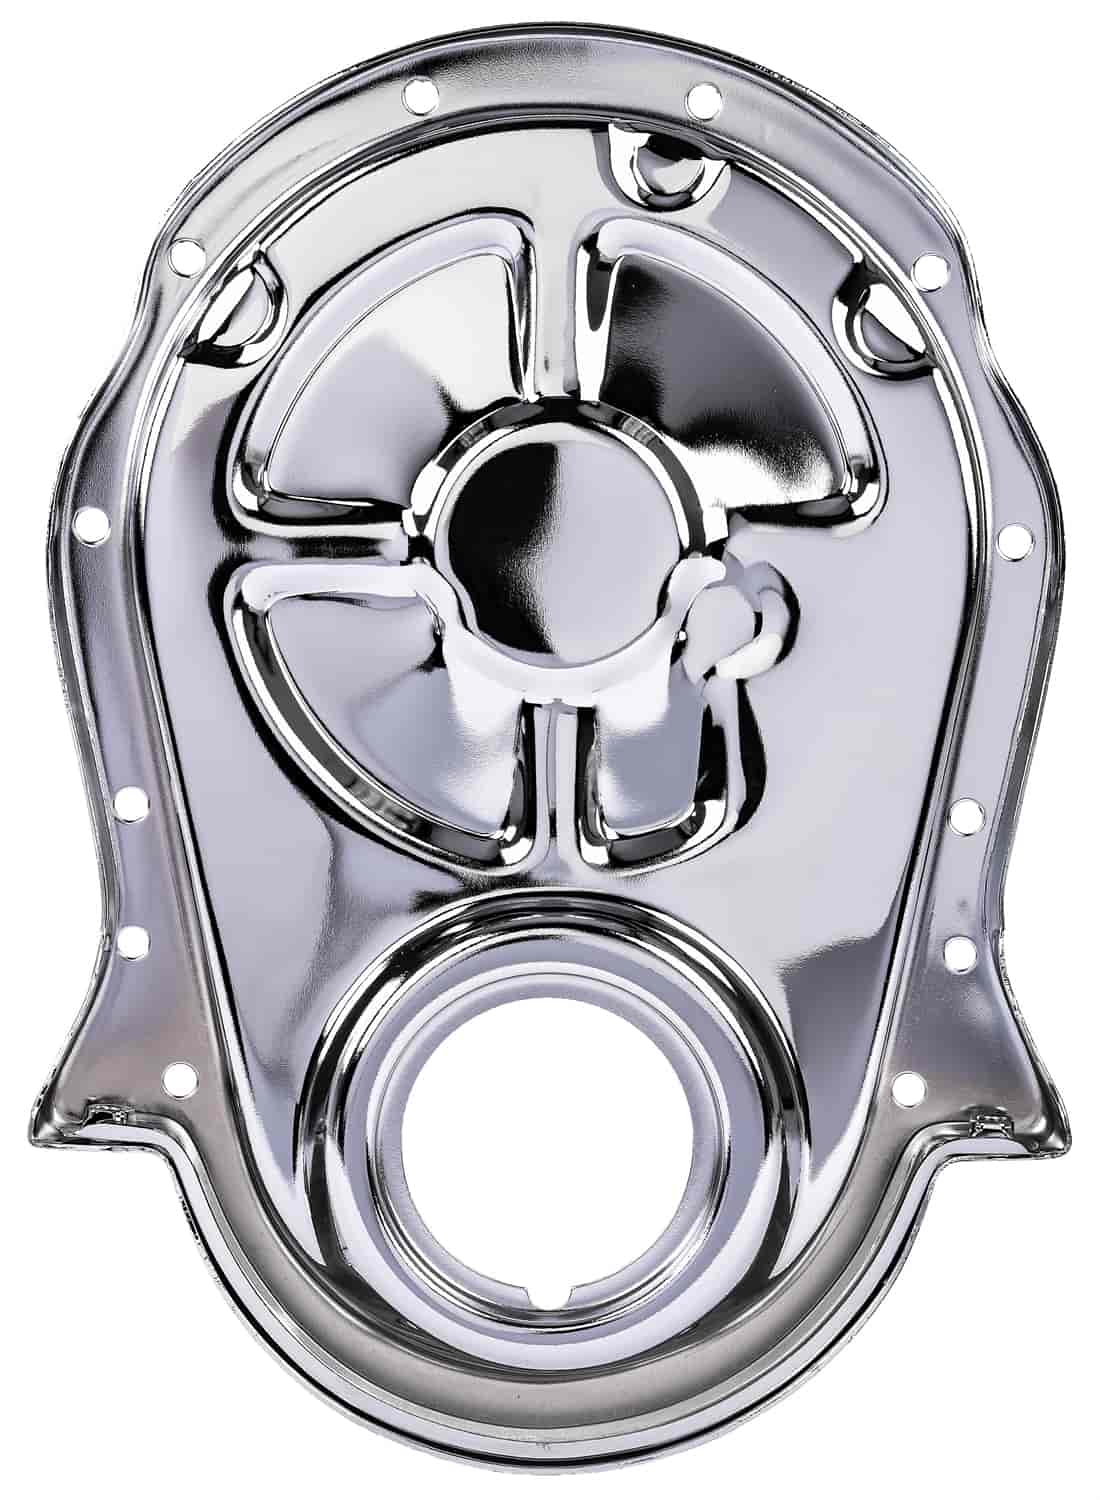 Timing Cover for 1966-1990 Big Block Chevy Mark IV 396, 402, 427, 454 [Chrome]